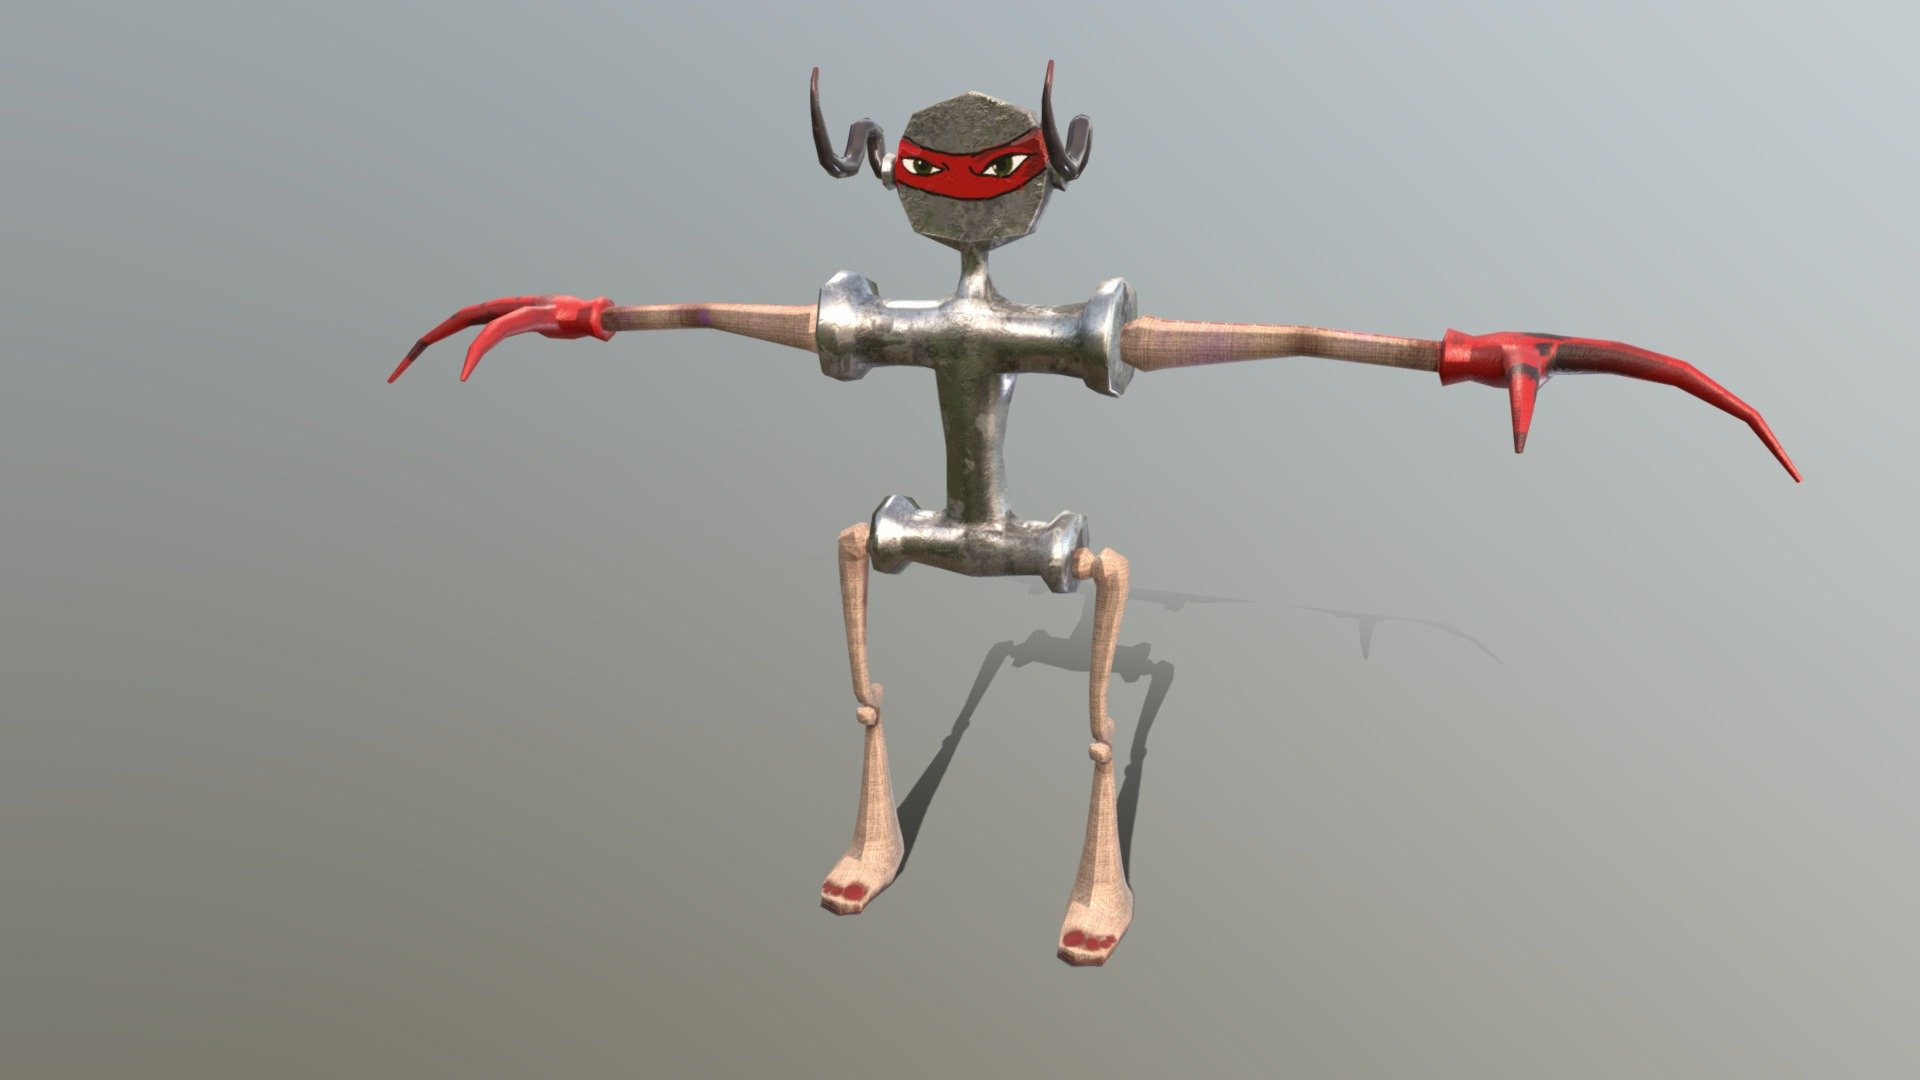 This a cartoon character. I used Autodesk Maya and Substance Painter to develop the model and texture maps. I created a ninja character. It has a silver head,  body, and light-colored fibrous limbs. Hands and feet are red, like the eye mask 3d model